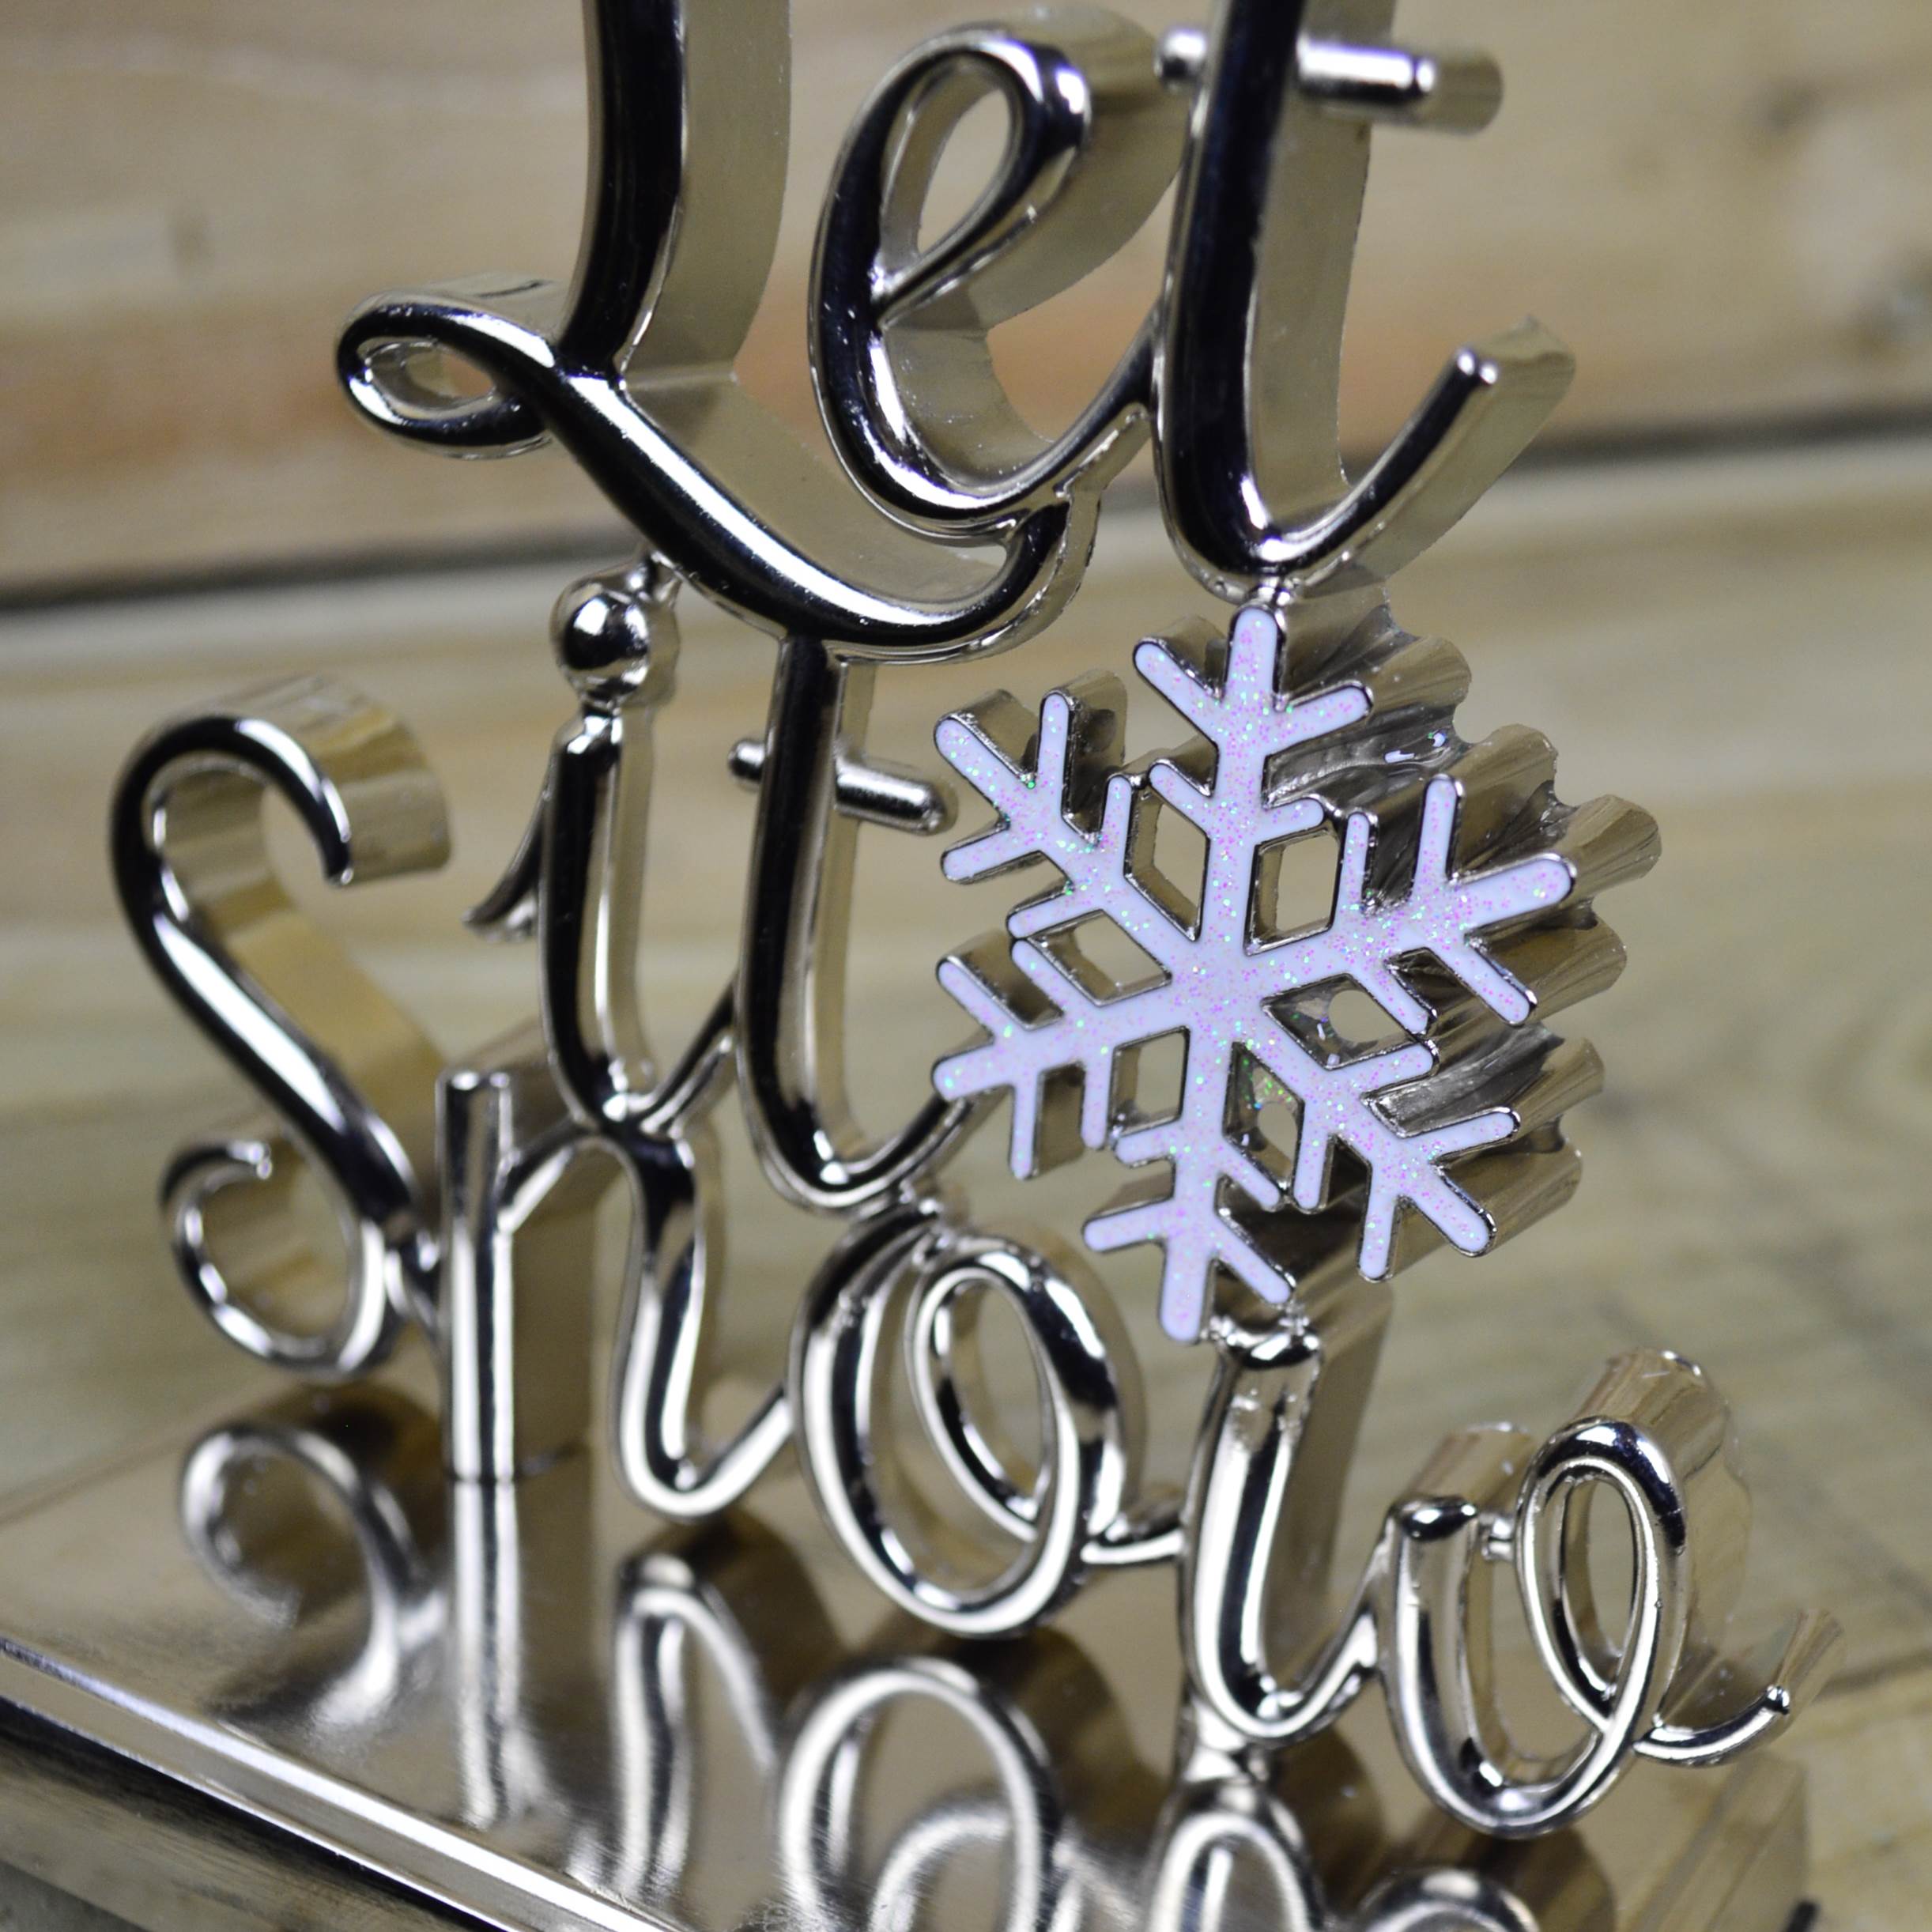 22cm Silver Christmas Stocking Hanger - Let it Snow